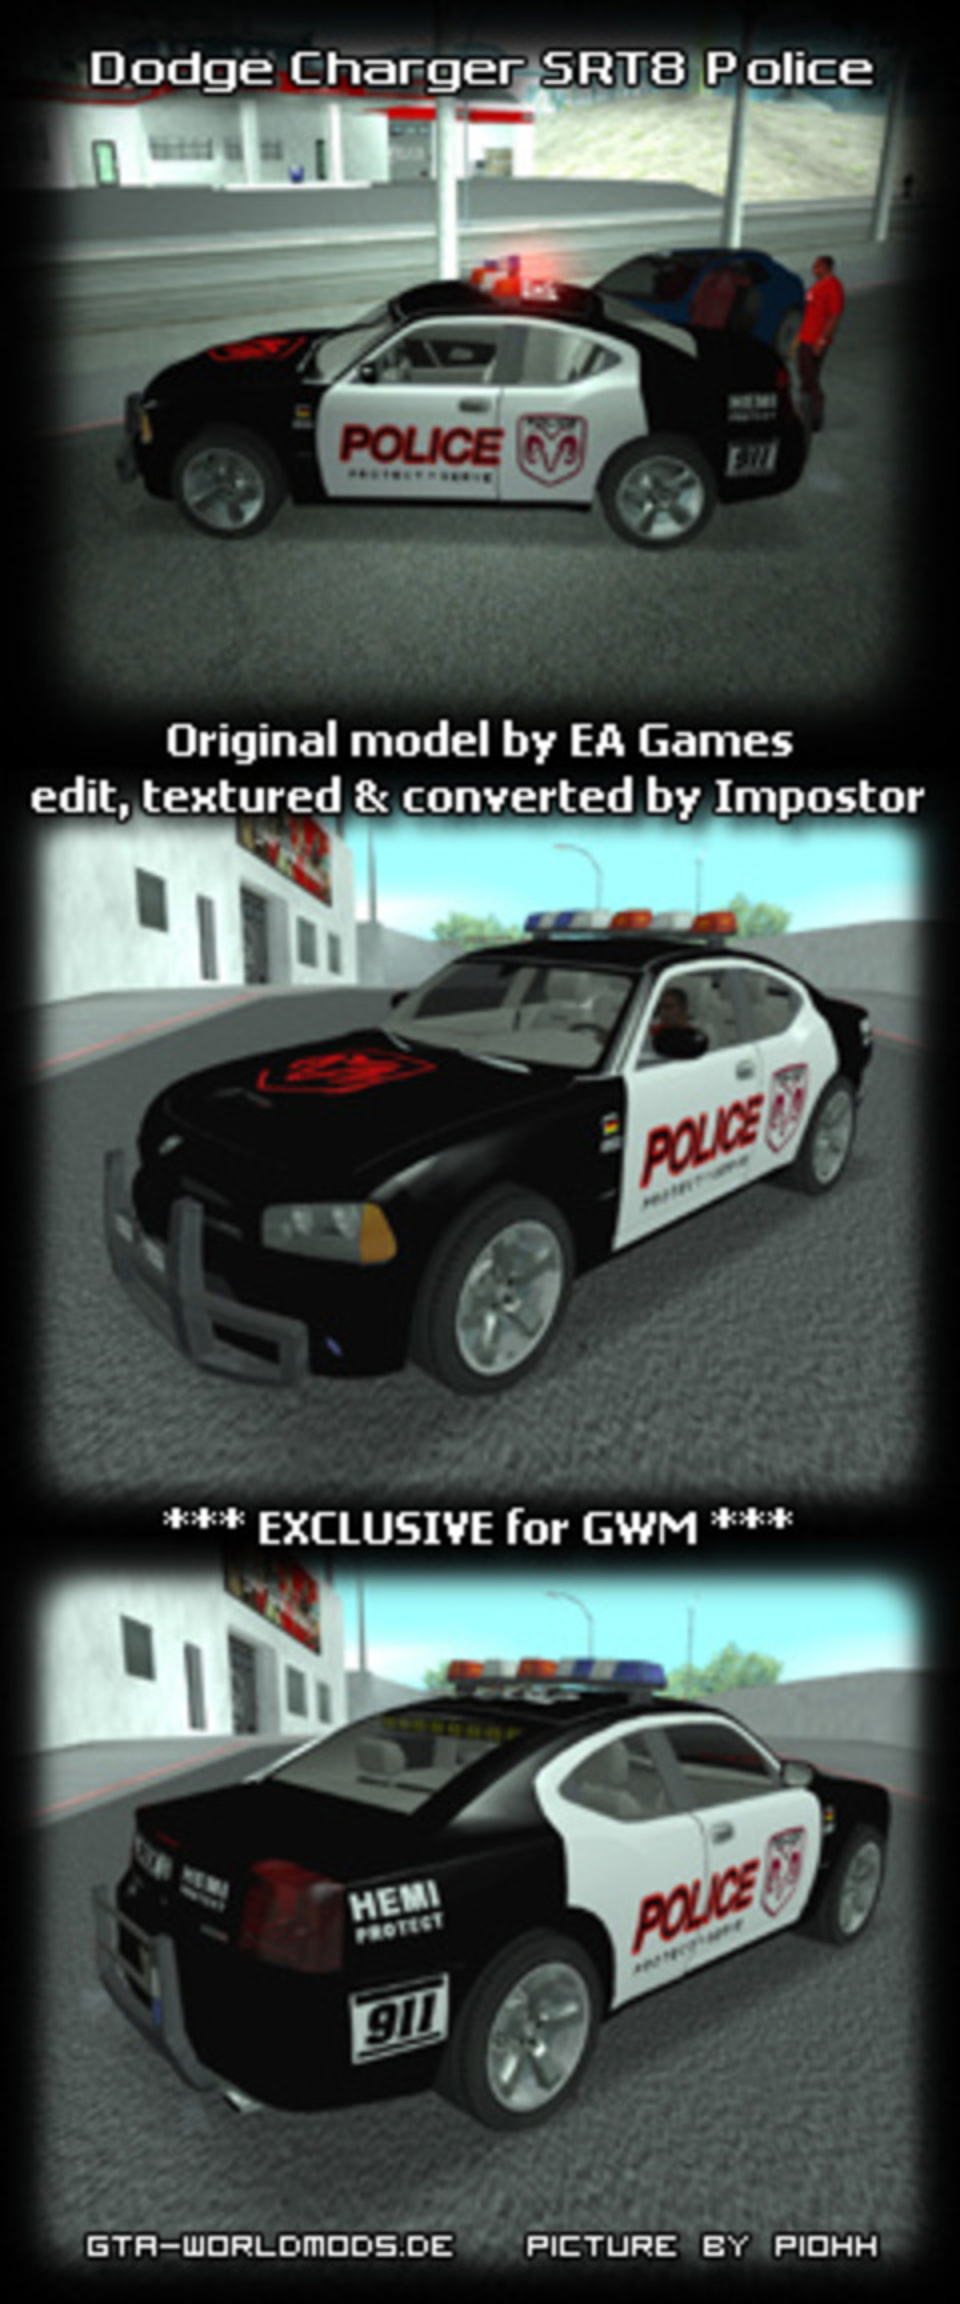 Dodge Charger Police Special Topic for more Screens and comments Homepage: